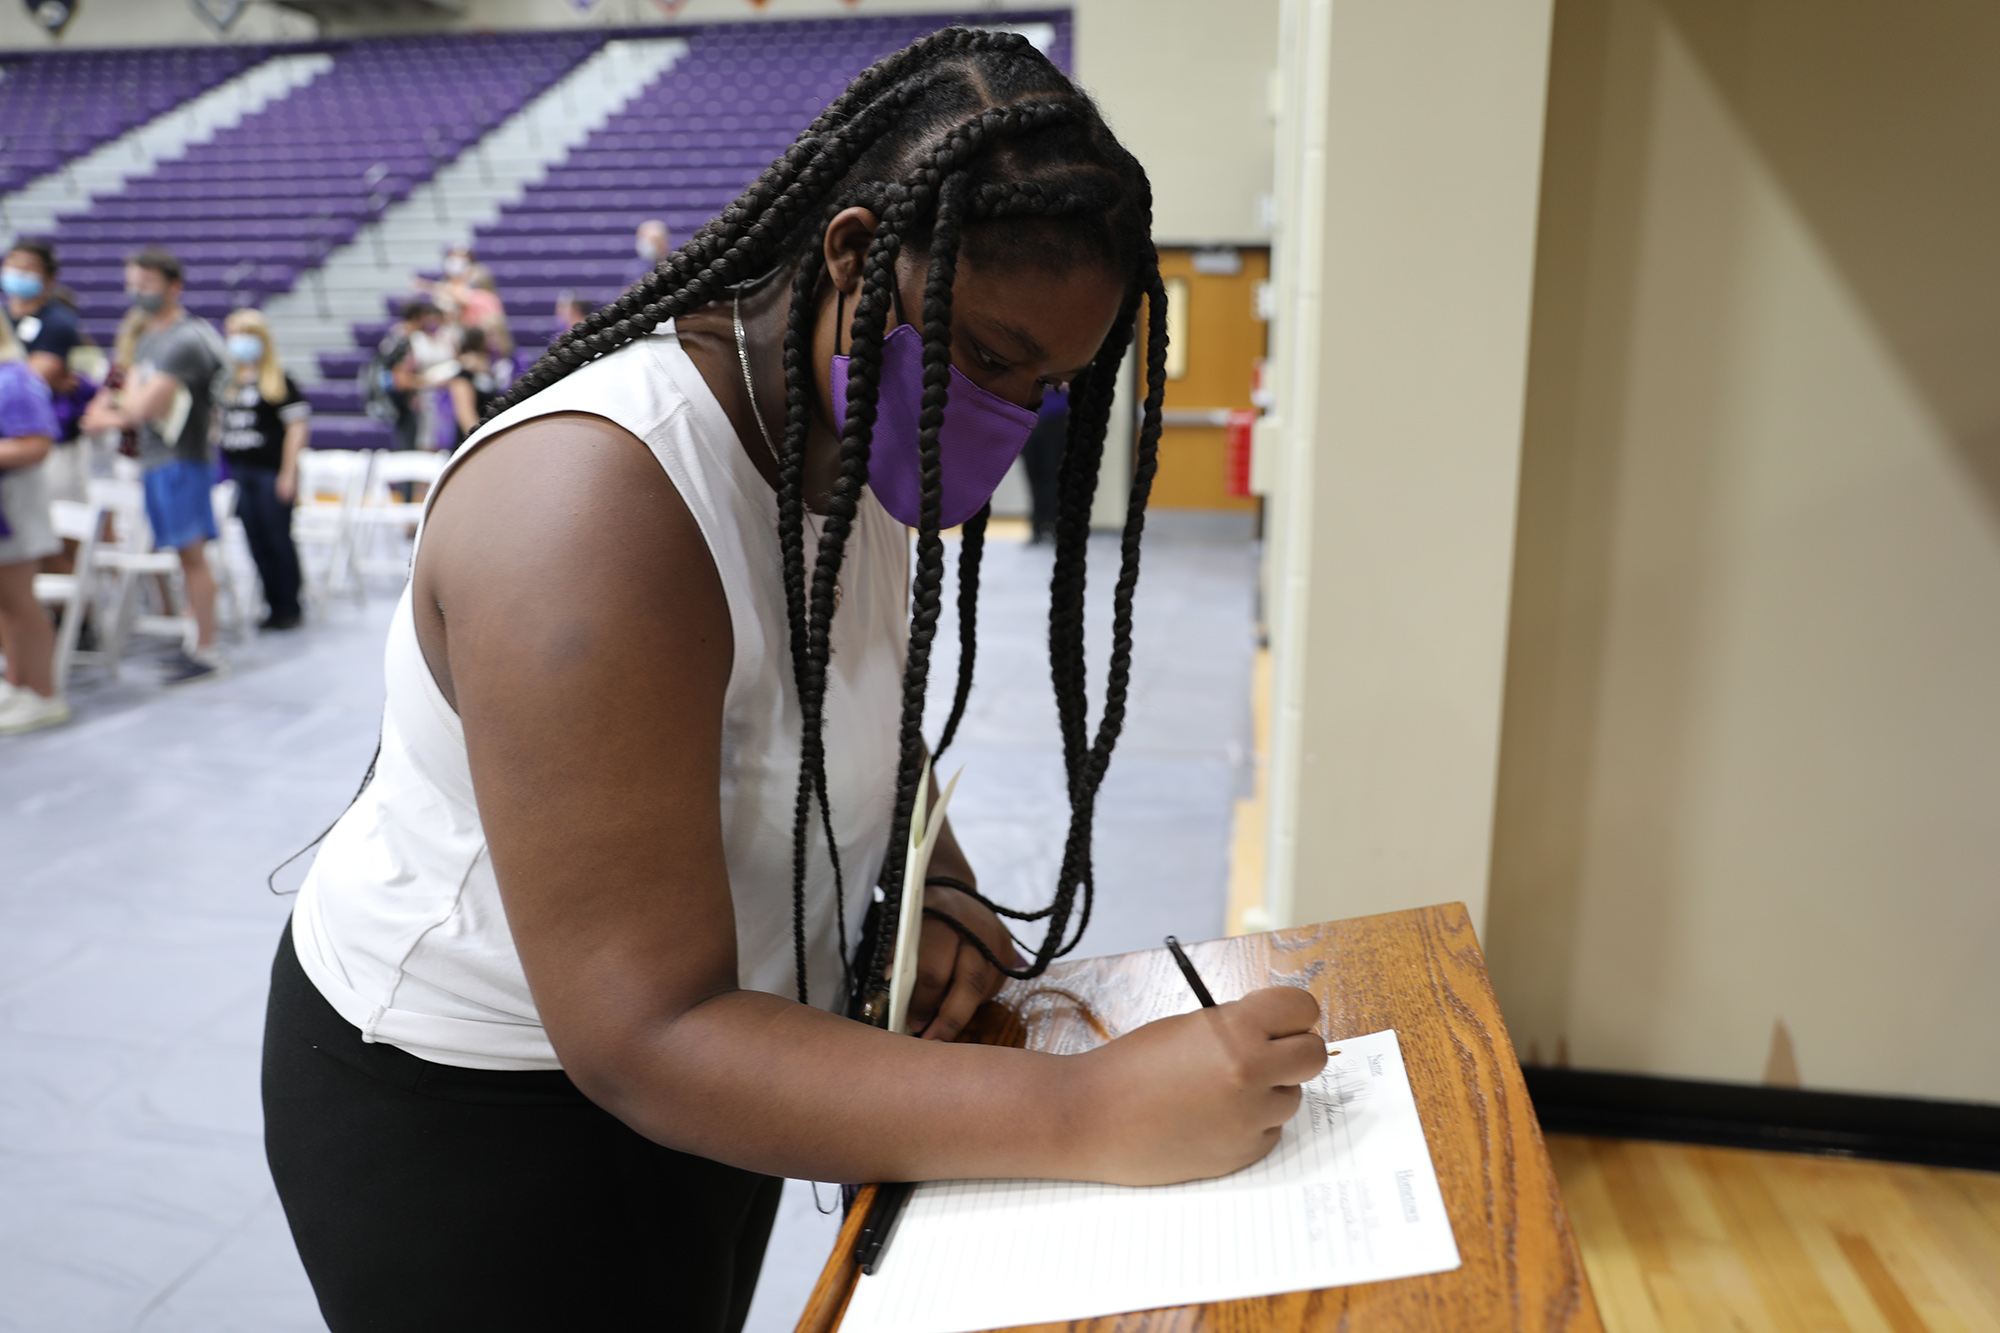 University of Mount Union Welcomes Class of 2025 in Annual Matriculation Convocation